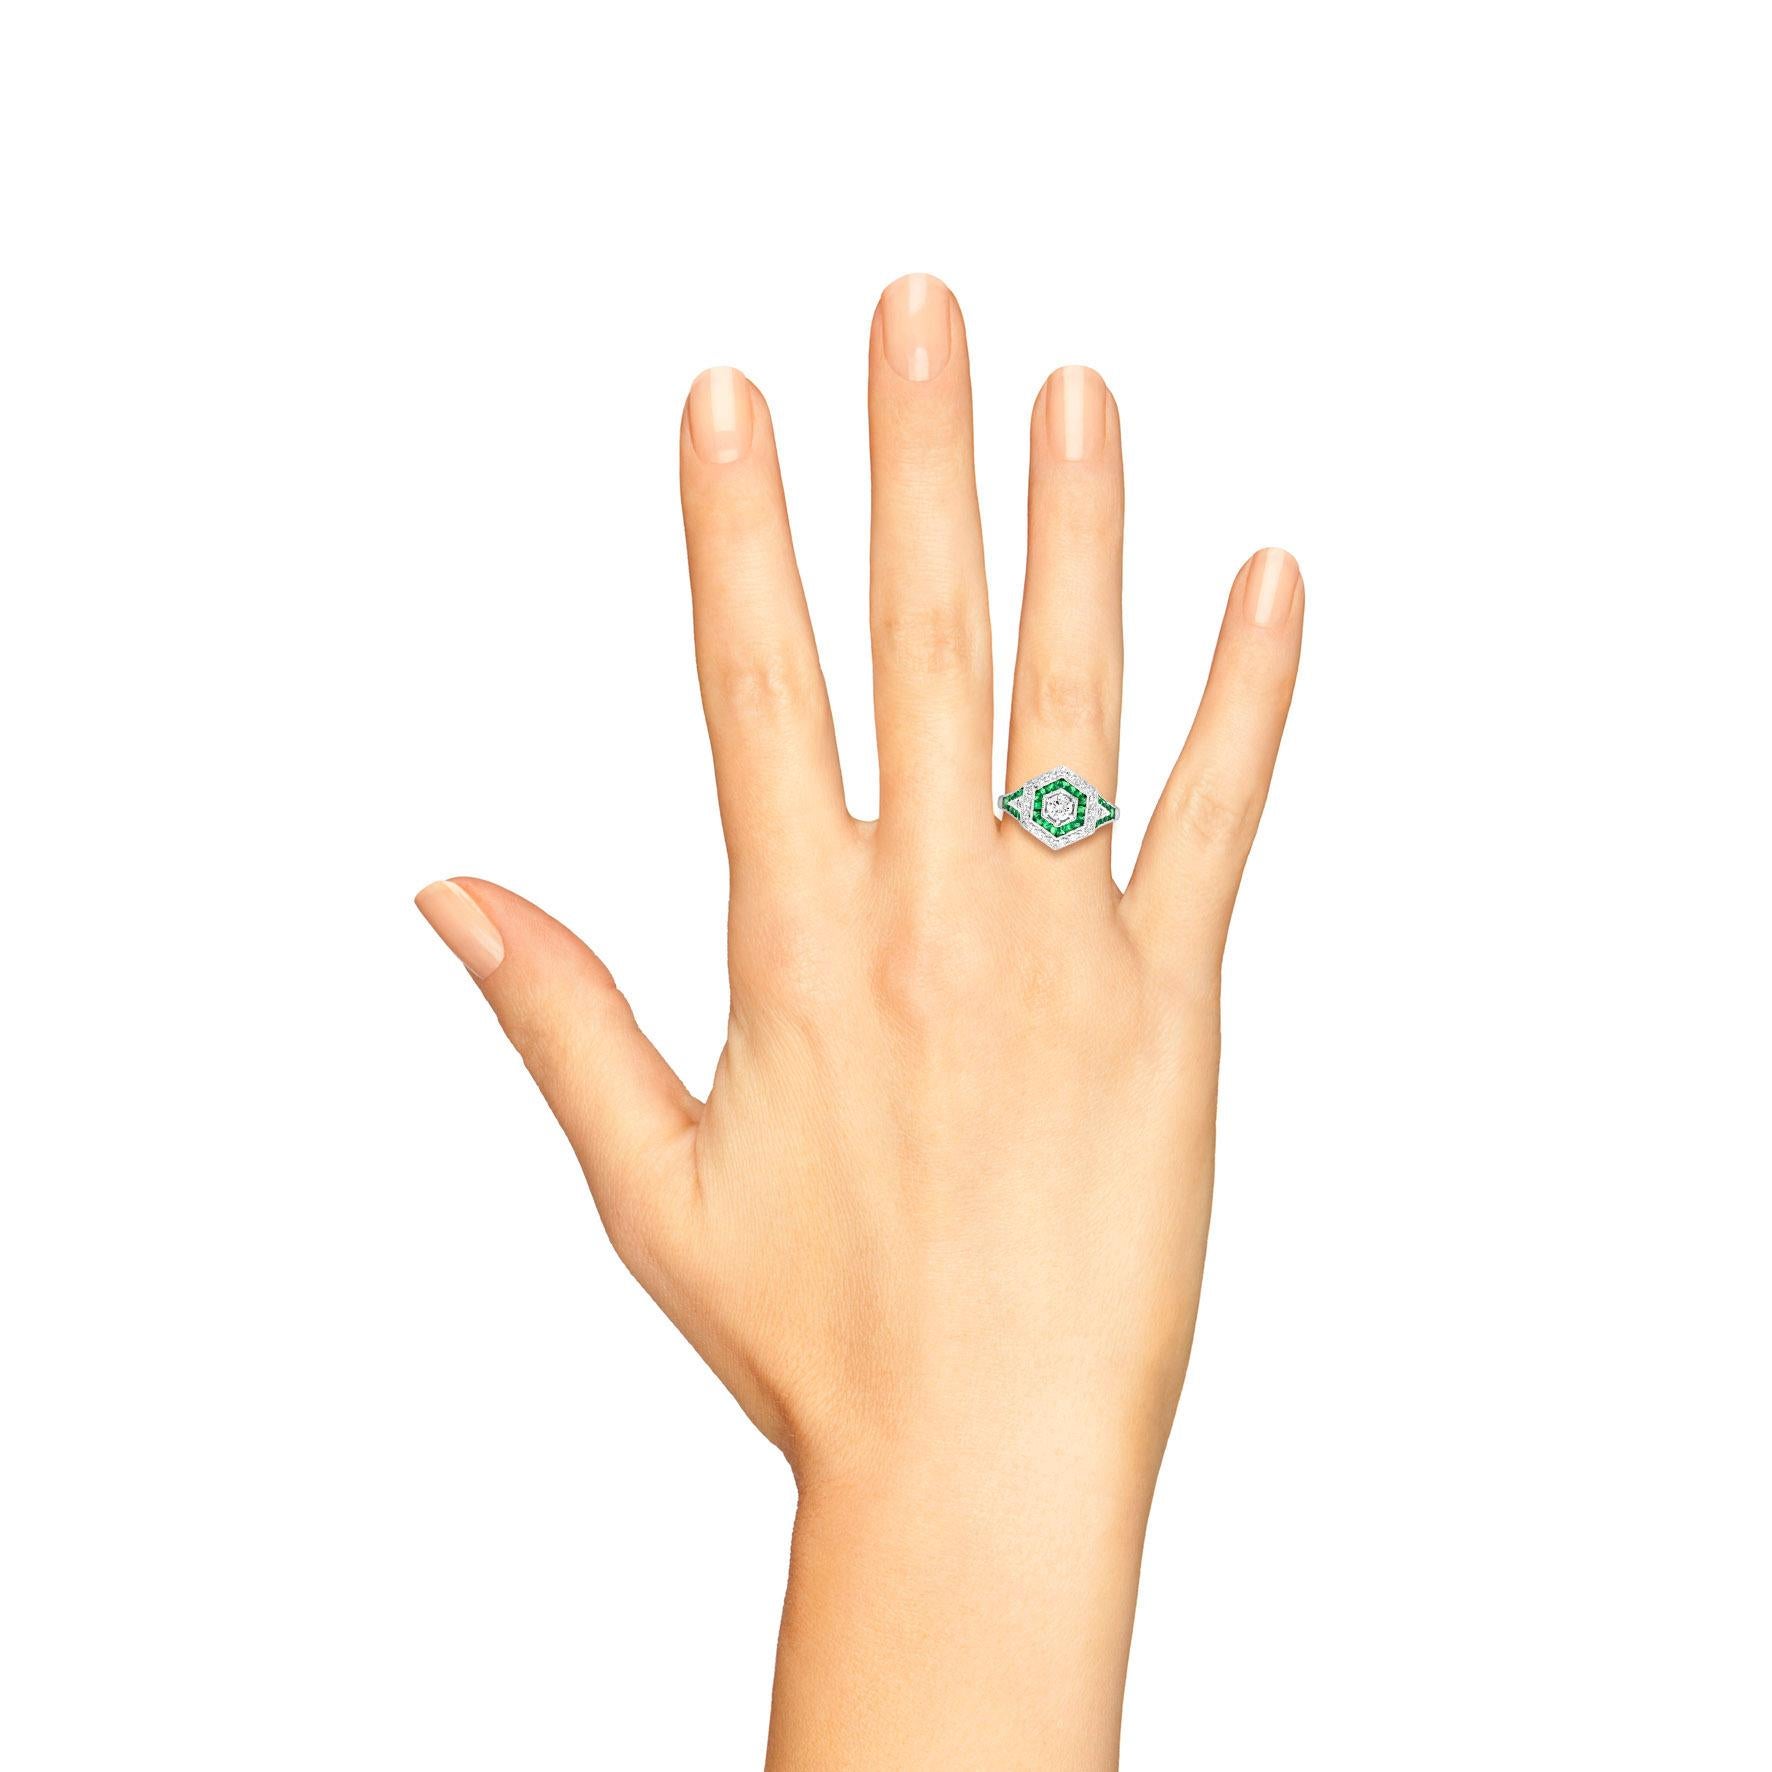 A striking, almost architectural flavor to this Art Deco inspired target ring. The hexagonal head features concentric rows of round cut diamonds and French cut emeralds around a central 0.25 carat diamond. True to its era, the edges are finished in